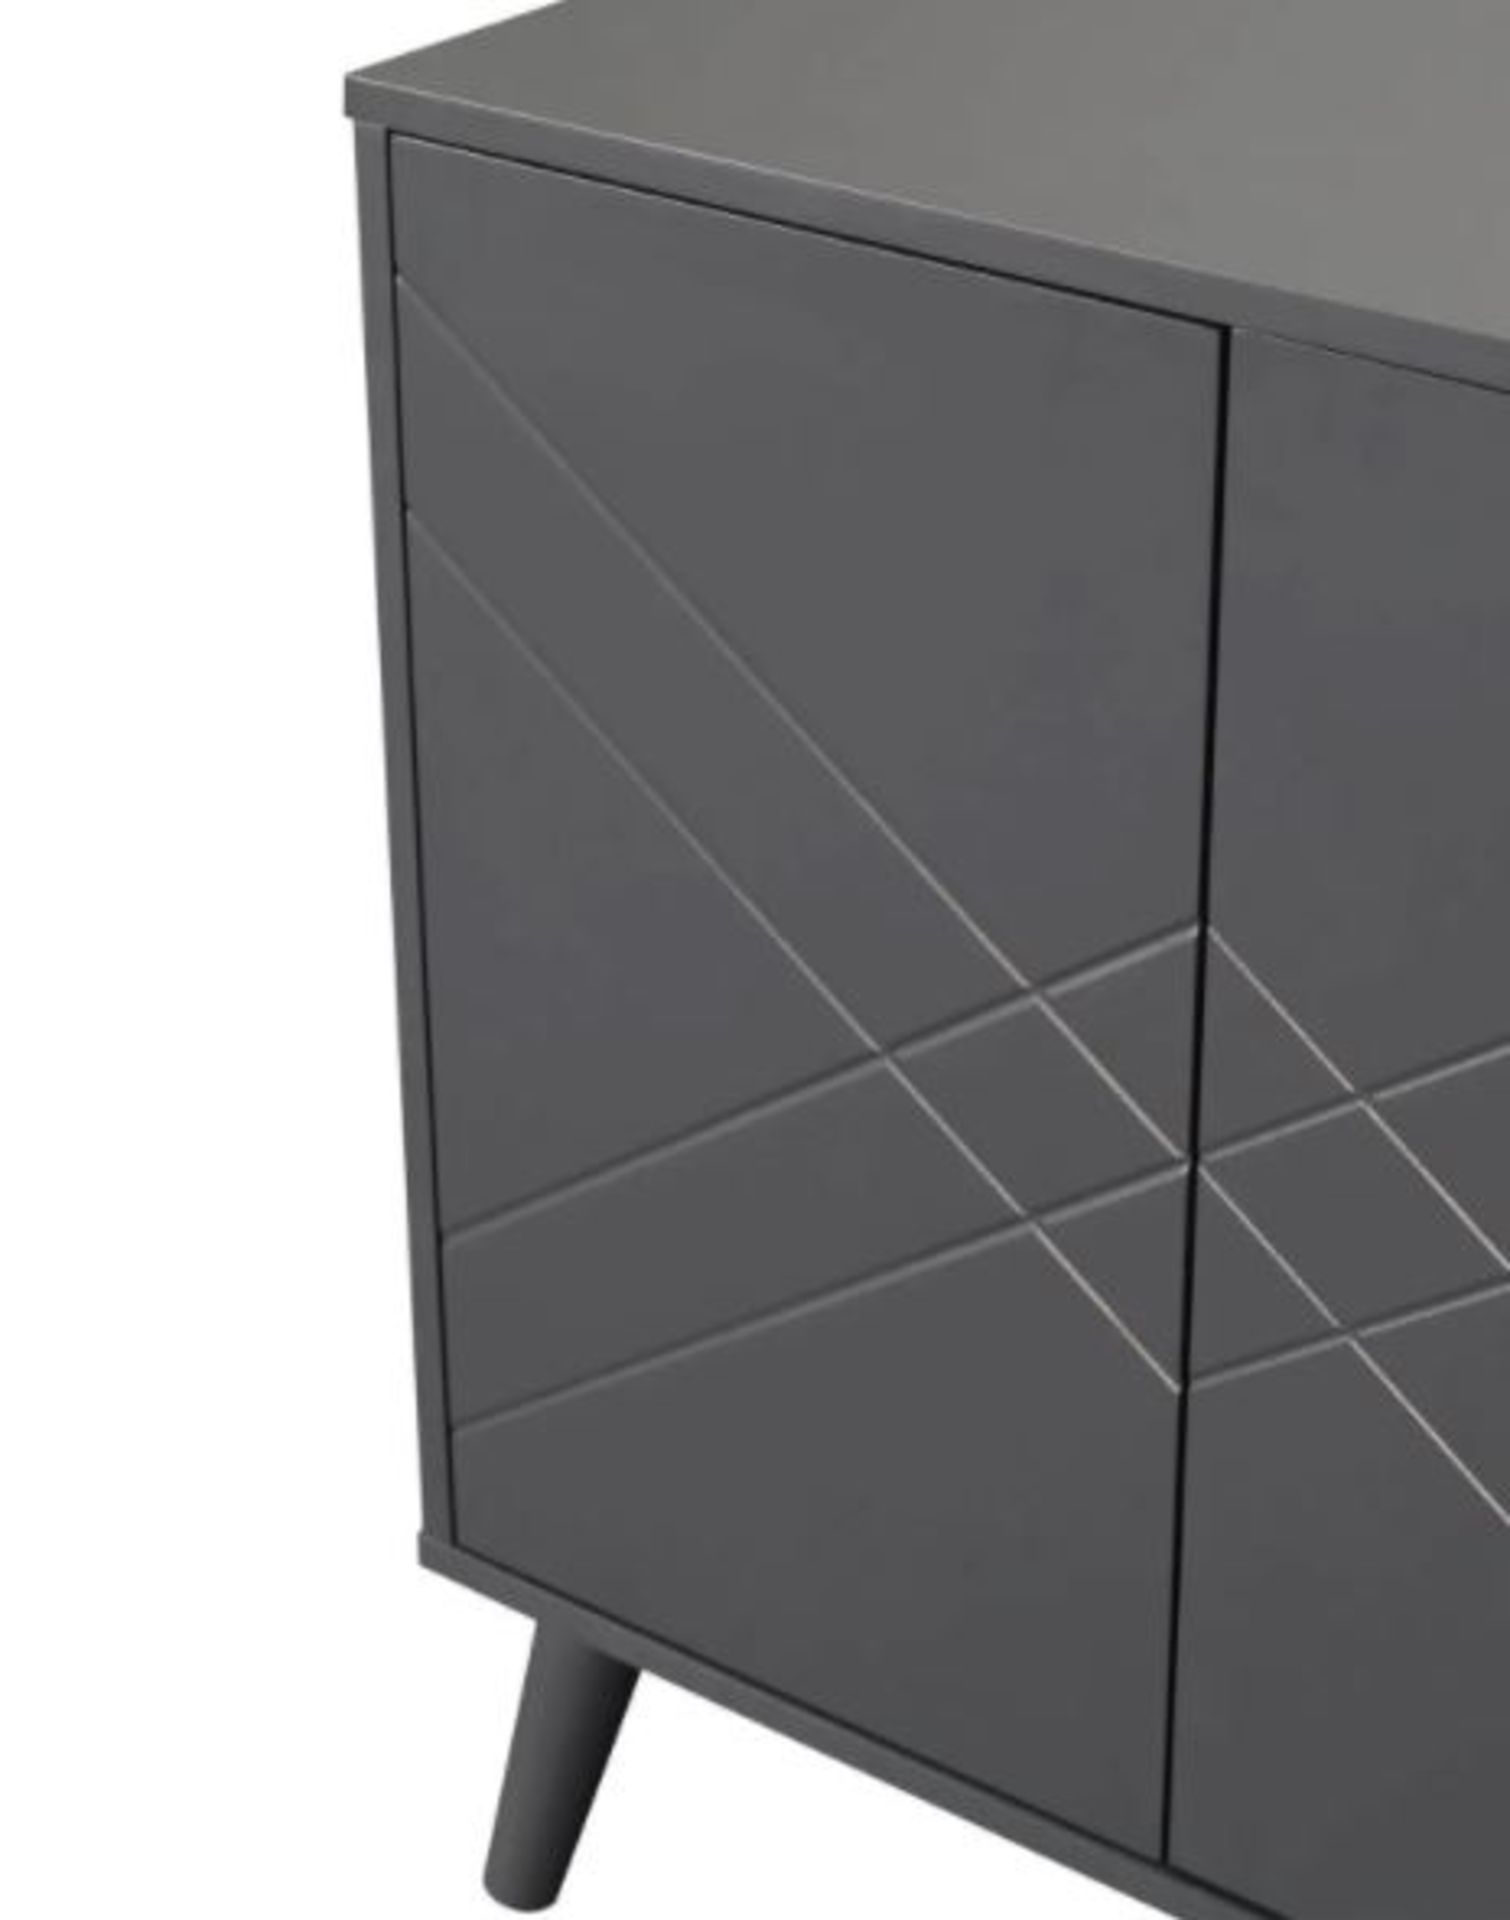 (R7G) 2x Hamilton Hallway Cabinet Charcoal RRP £60 Each - Image 4 of 5